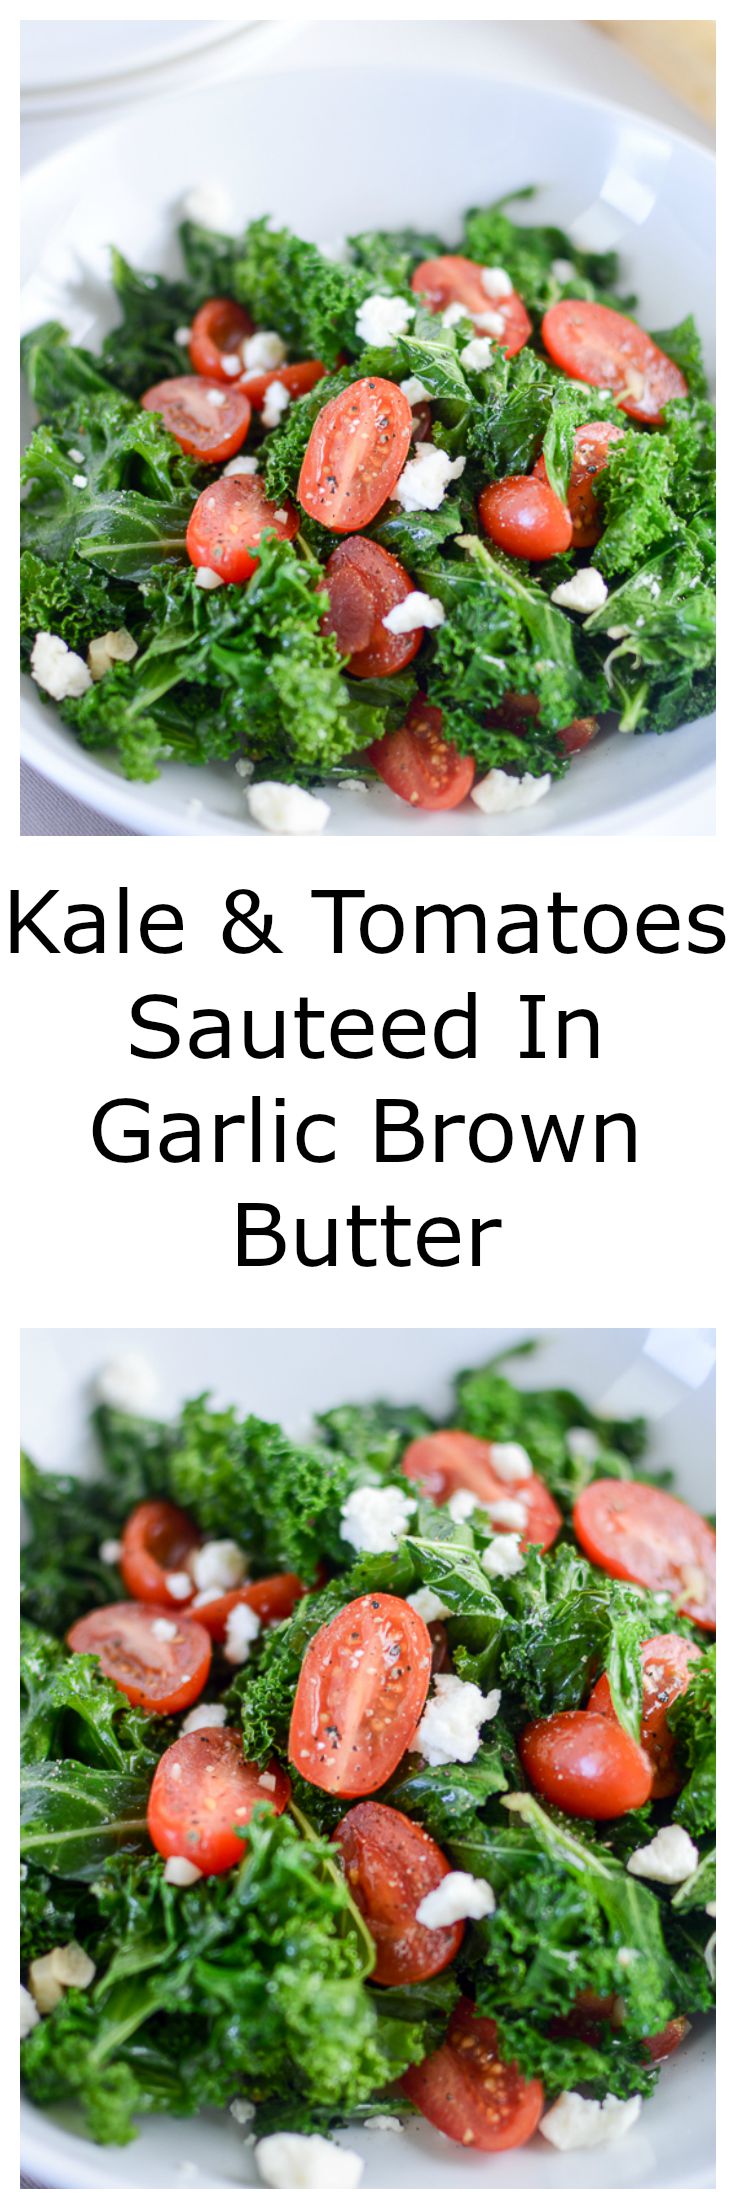 kale & tomatoes sauteed in garlic brown butter